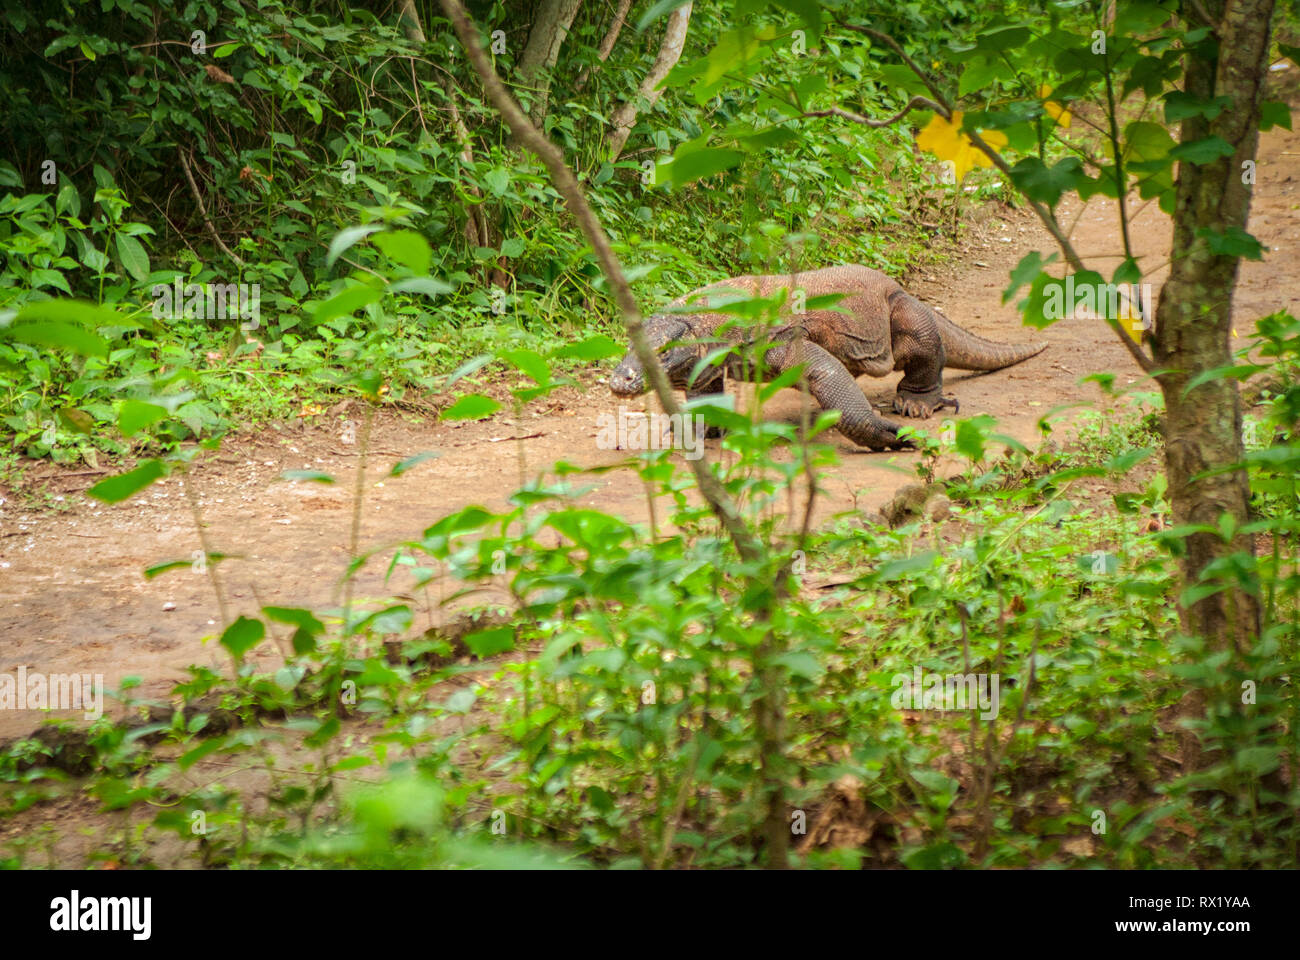 The Komodo dragon, also known as the Komodo monitor, is a species of lizard found in the Indonesian islands of Komodo and Rinca. They are dangerous. Stock Photo